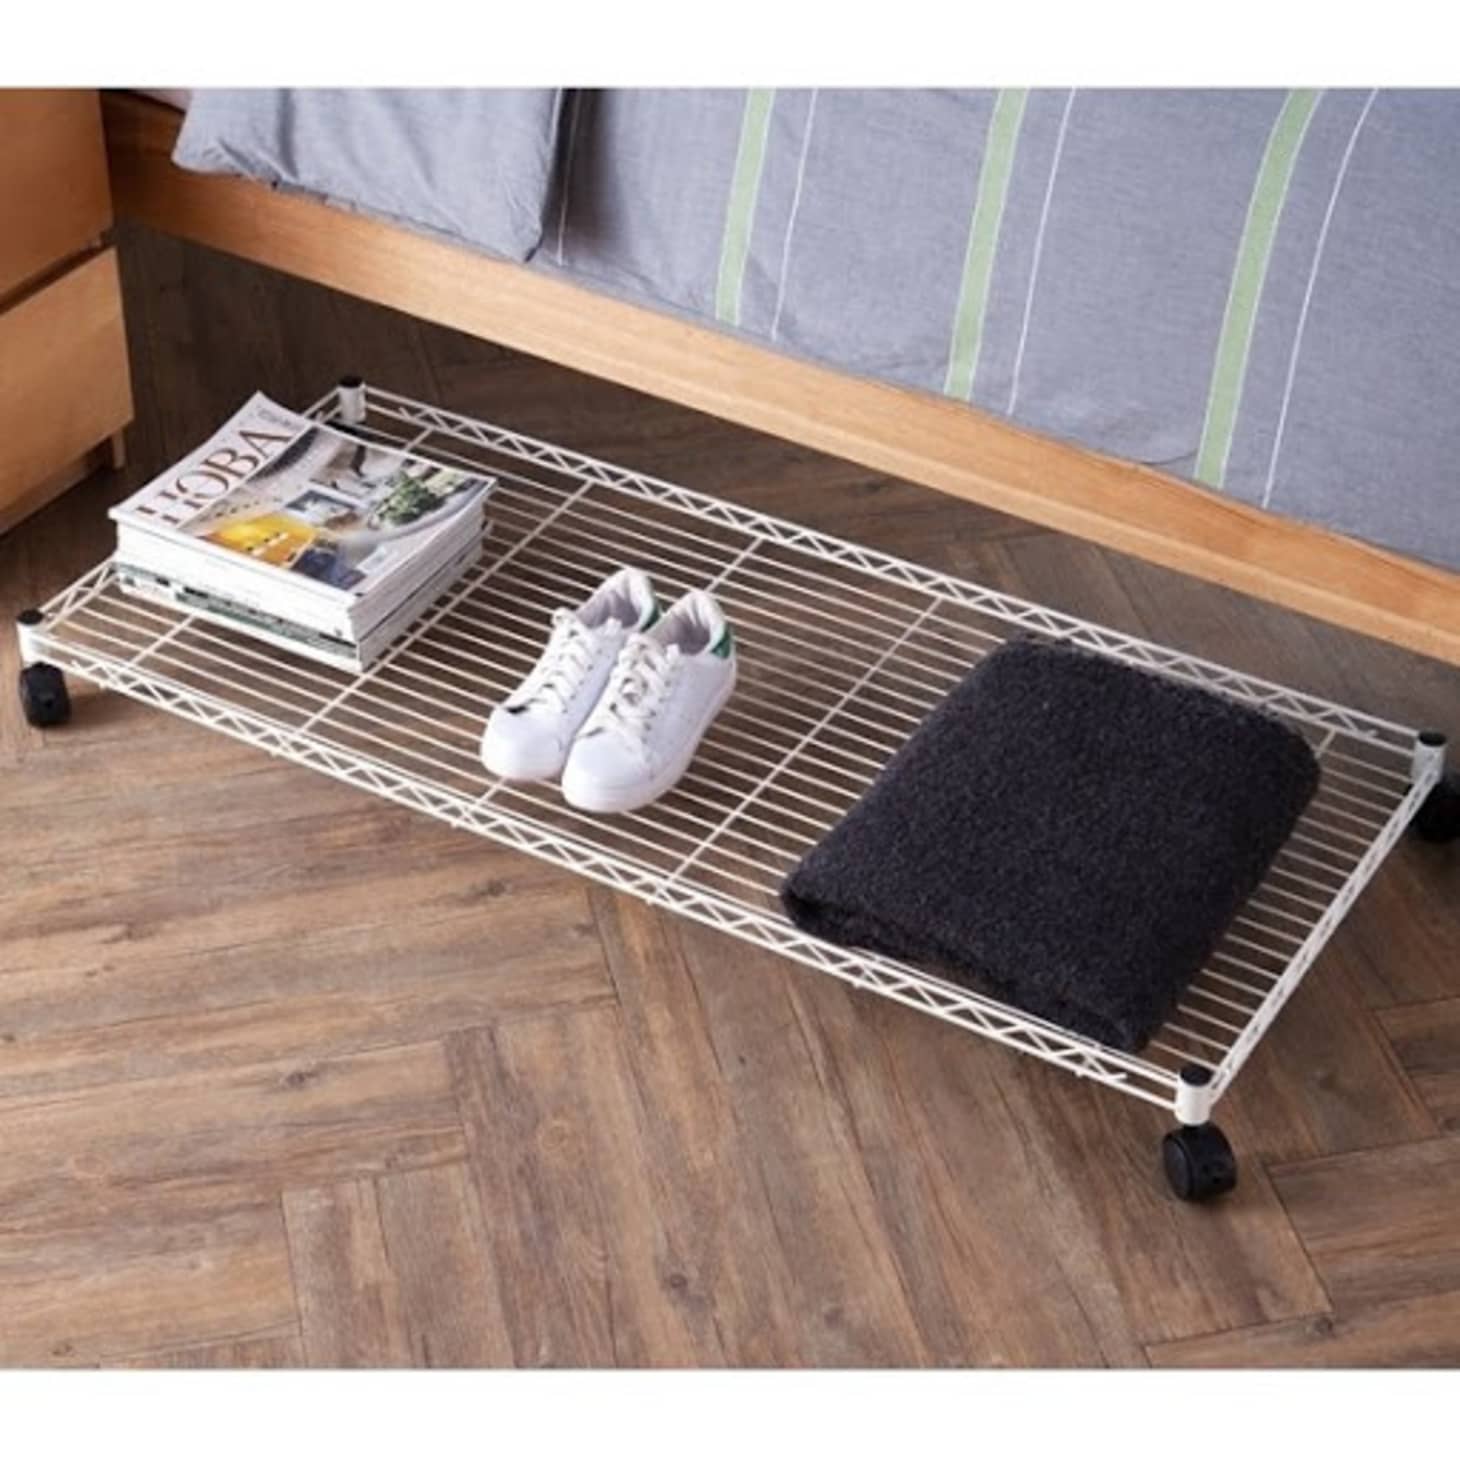 Best Under Bed Storage Solutions To Maximize Space Apartment Therapy